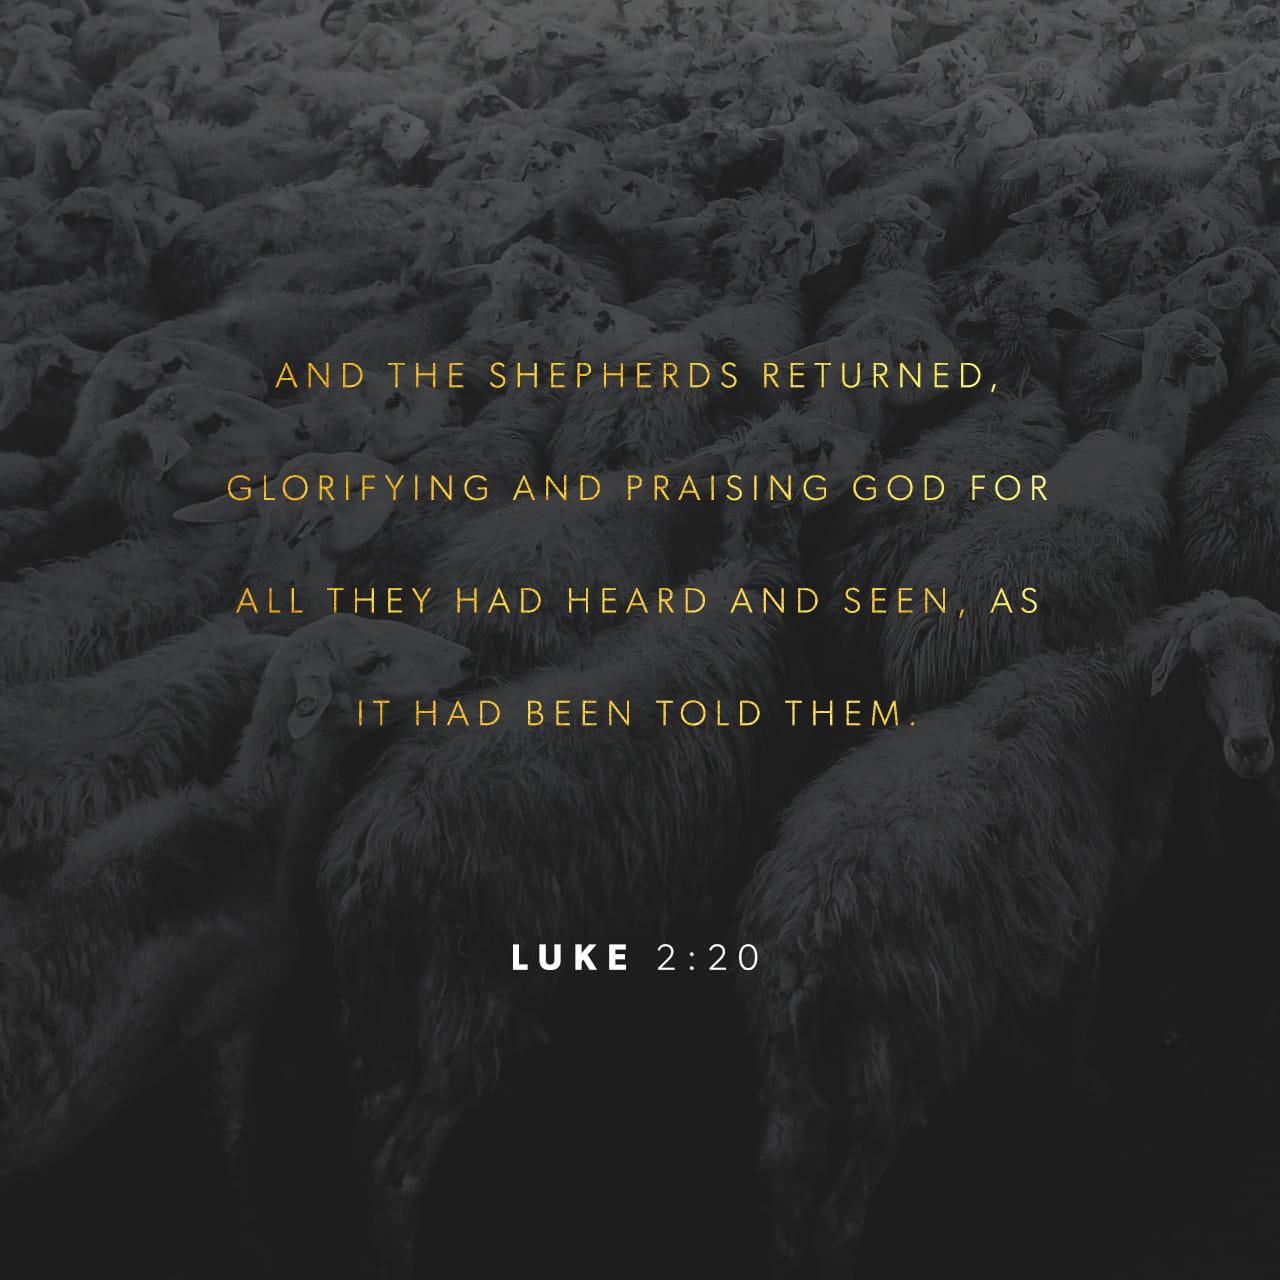 Bible Verse of the Day - day 152 - image 1182 (Luke 2:8-20)